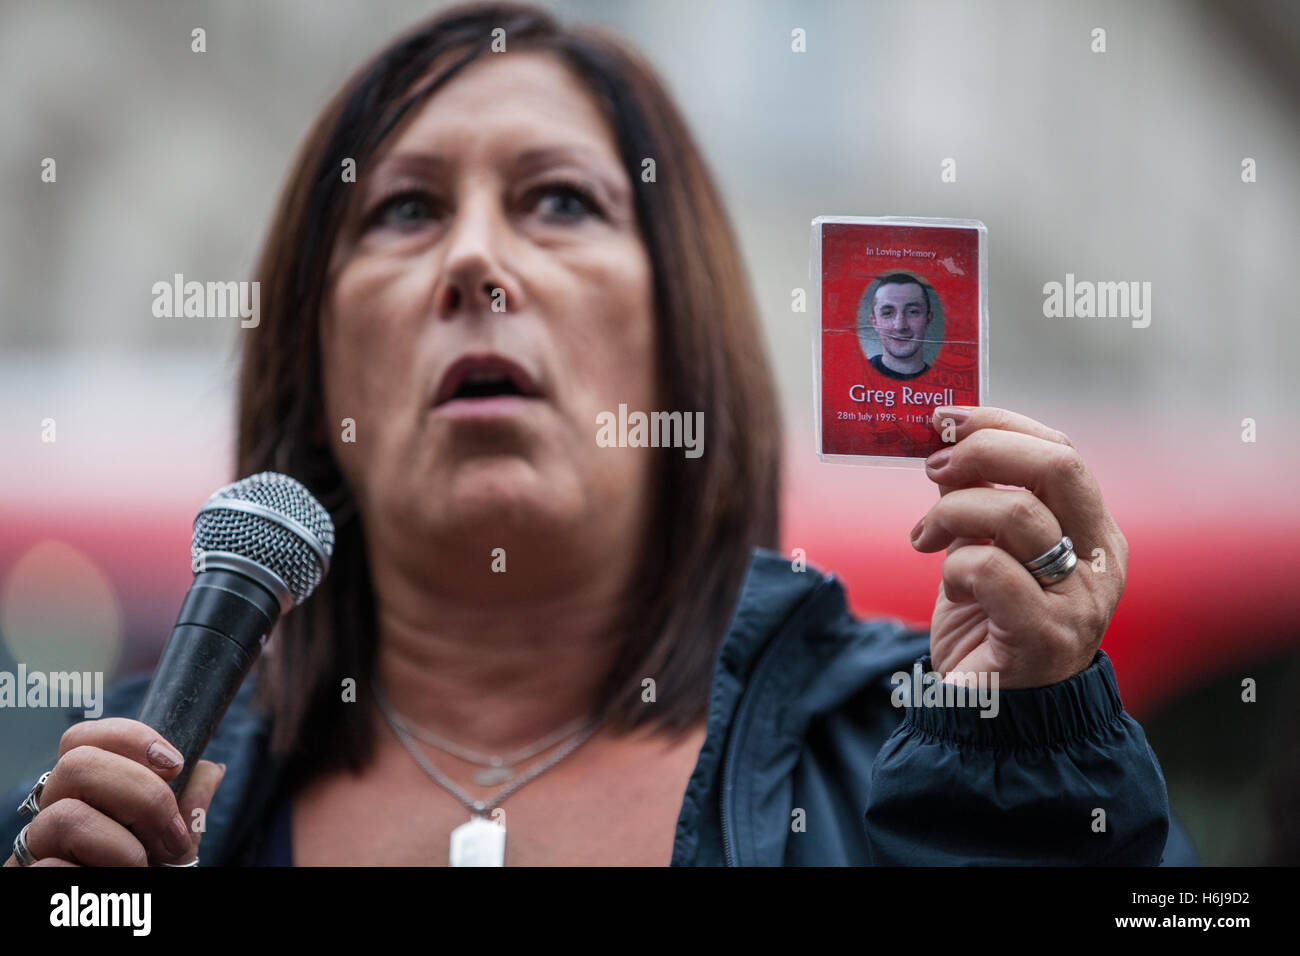 London, UK. 29th October, 2016. Karin Revell, mother of Greg Revell, addresses campaigners from the United Families and Friends Campaign (UFFC) outside Downing Street following their annual procession. Greg Revell, 18, was found hanged in his cell on 11th June 2014 during his second night in custody at HMP Glen Parva in Leicestershire. Credit:  Mark Kerrison/Alamy Live News Stock Photo